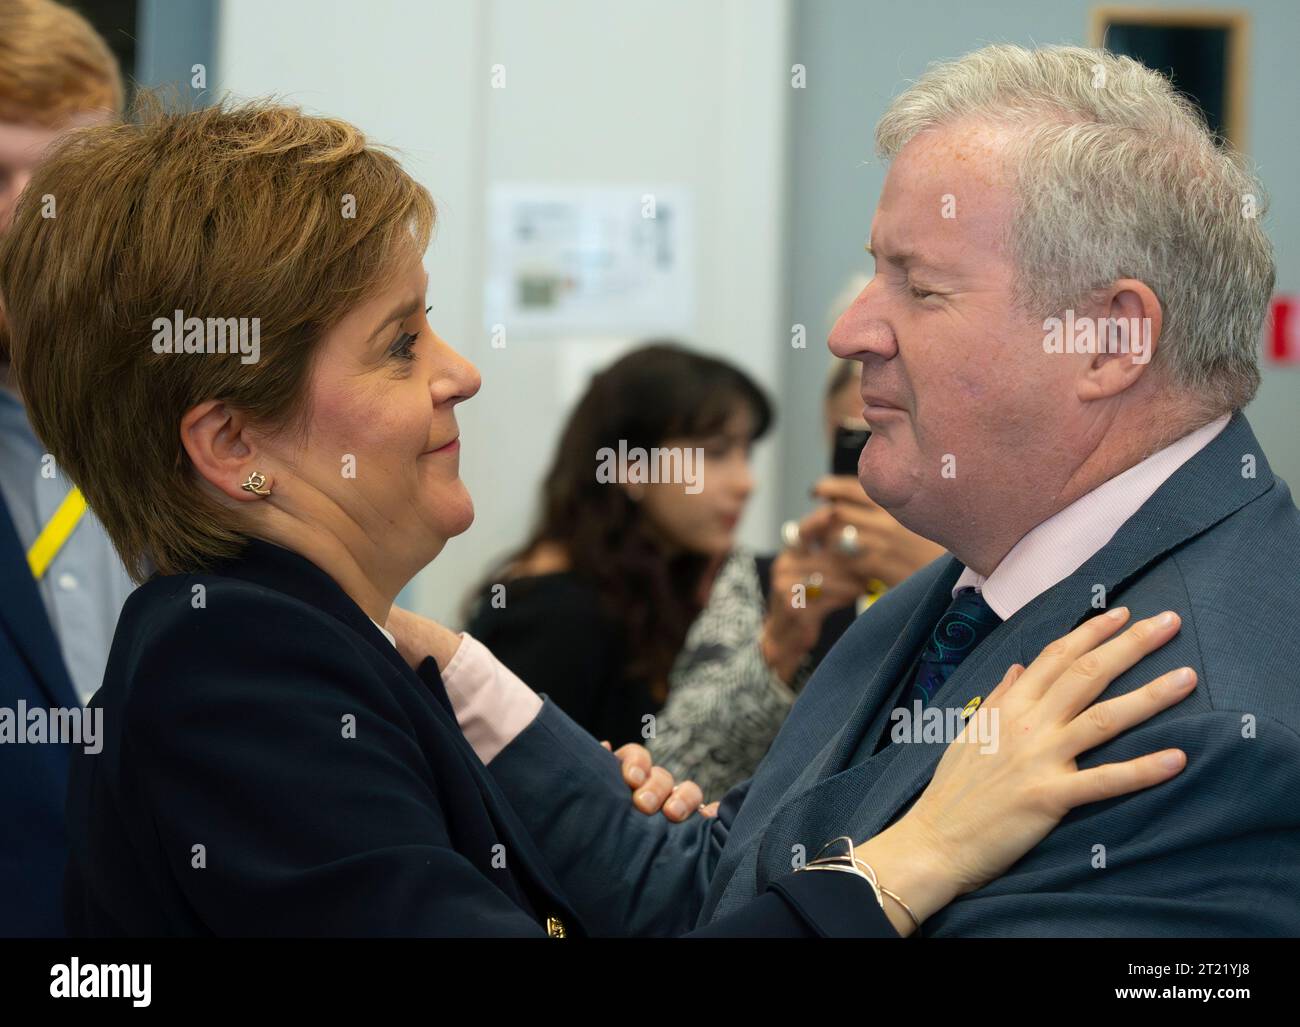 Aberdeen, Scotland, UK. 16th October 2023.  Day two of the SNP annual conference and former First Minister Nicola Sturgeon makes an appearance. A media frenzy followed before she made her way into the conference venue to listen to the afternoon’s proceedings. Nicola Sturgeon greets Ian Blackford MP. Iain Masterton/Alamy Live News Stock Photo